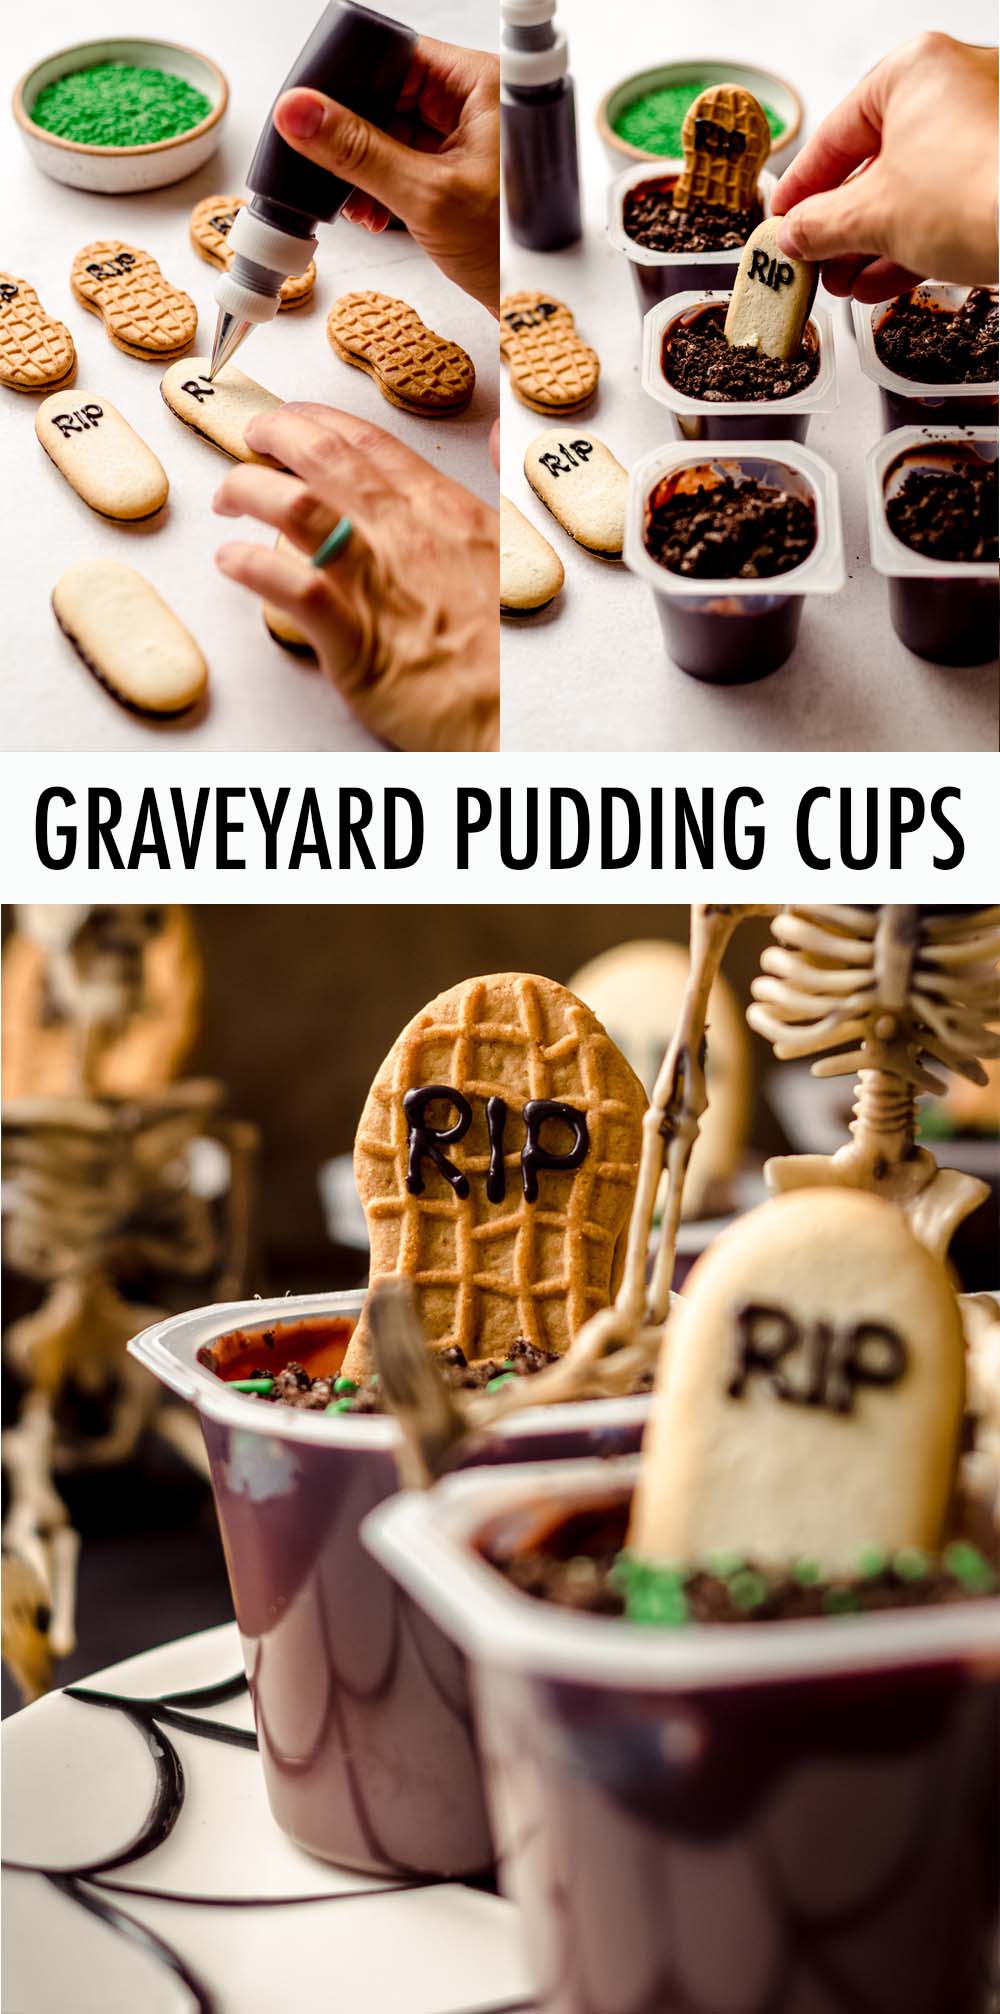 Turn pre-made pudding cups and cookies into cute no-bake Halloween treats fit for any ghost, ghoul, or zombie. Great for kids to make and eat and perfect for your Halloween party spread! via @frshaprilflours